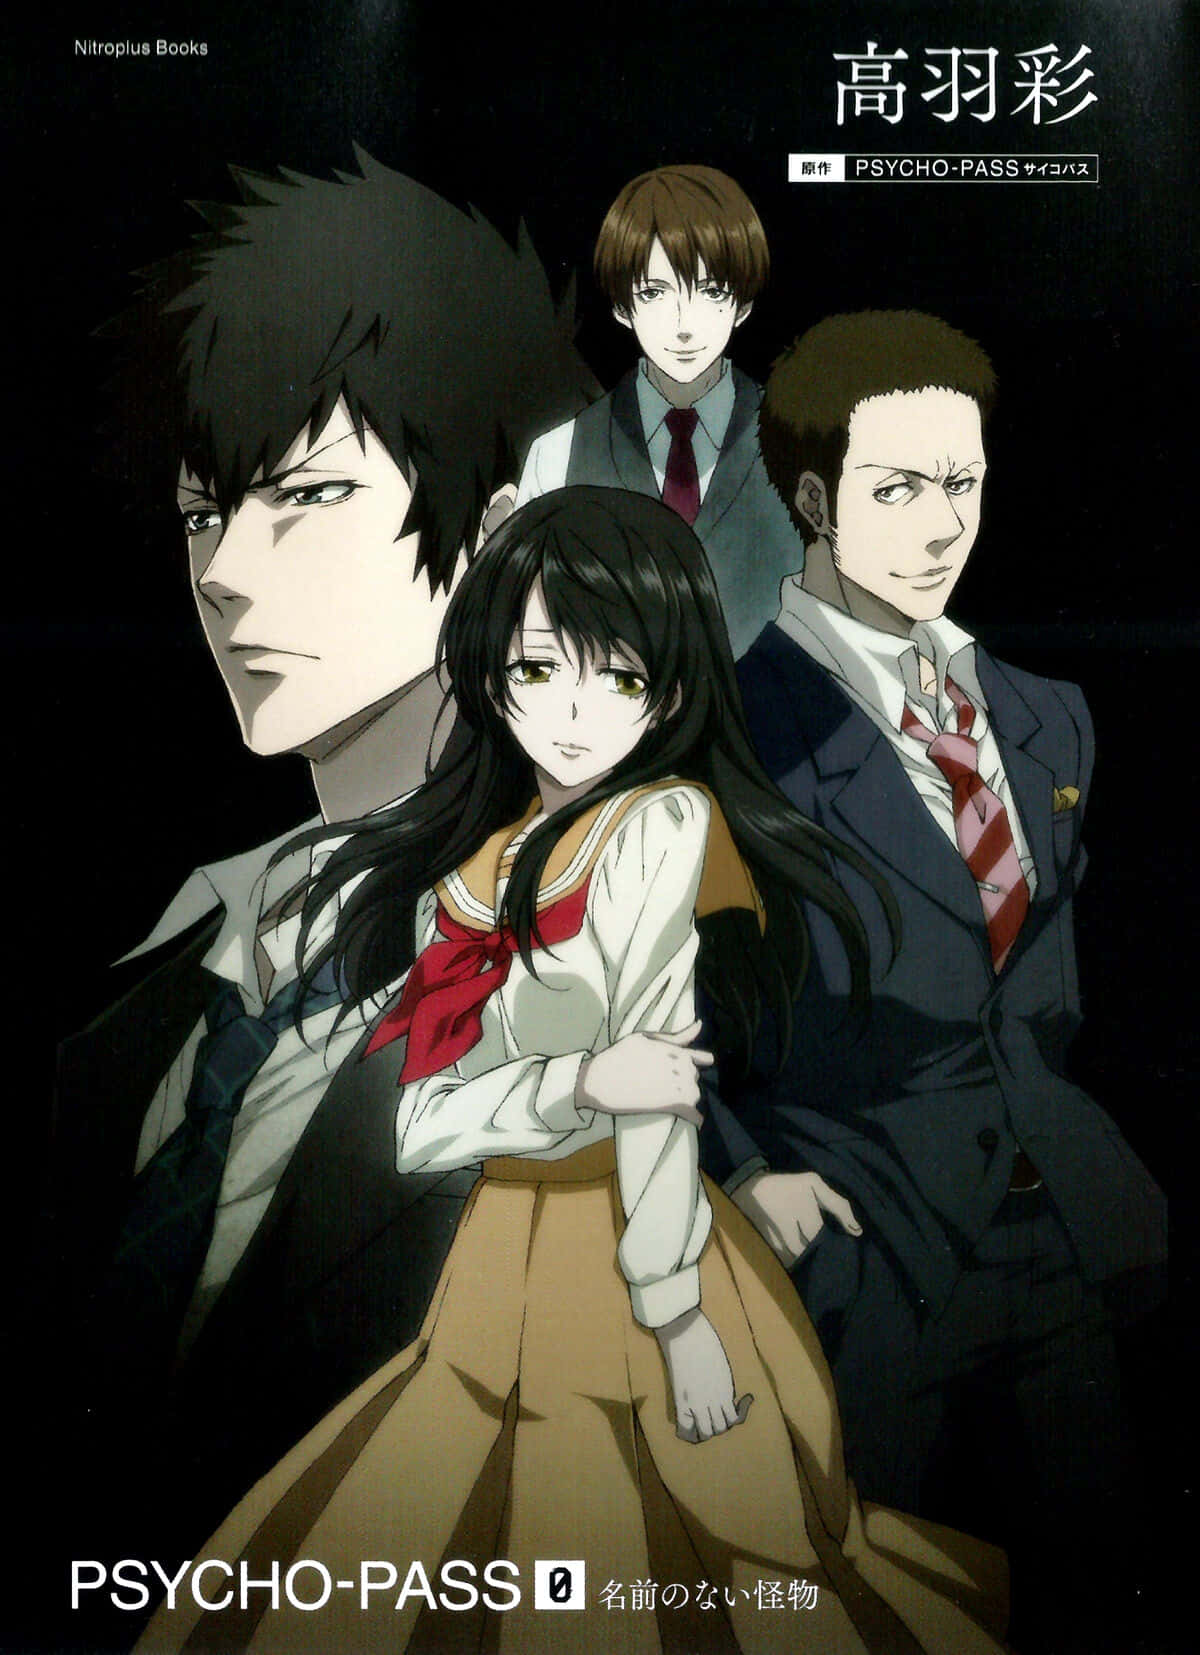 Enforcers And Inspectors Of Public Safety Bureau - Psycho-pass Anime Scene Background